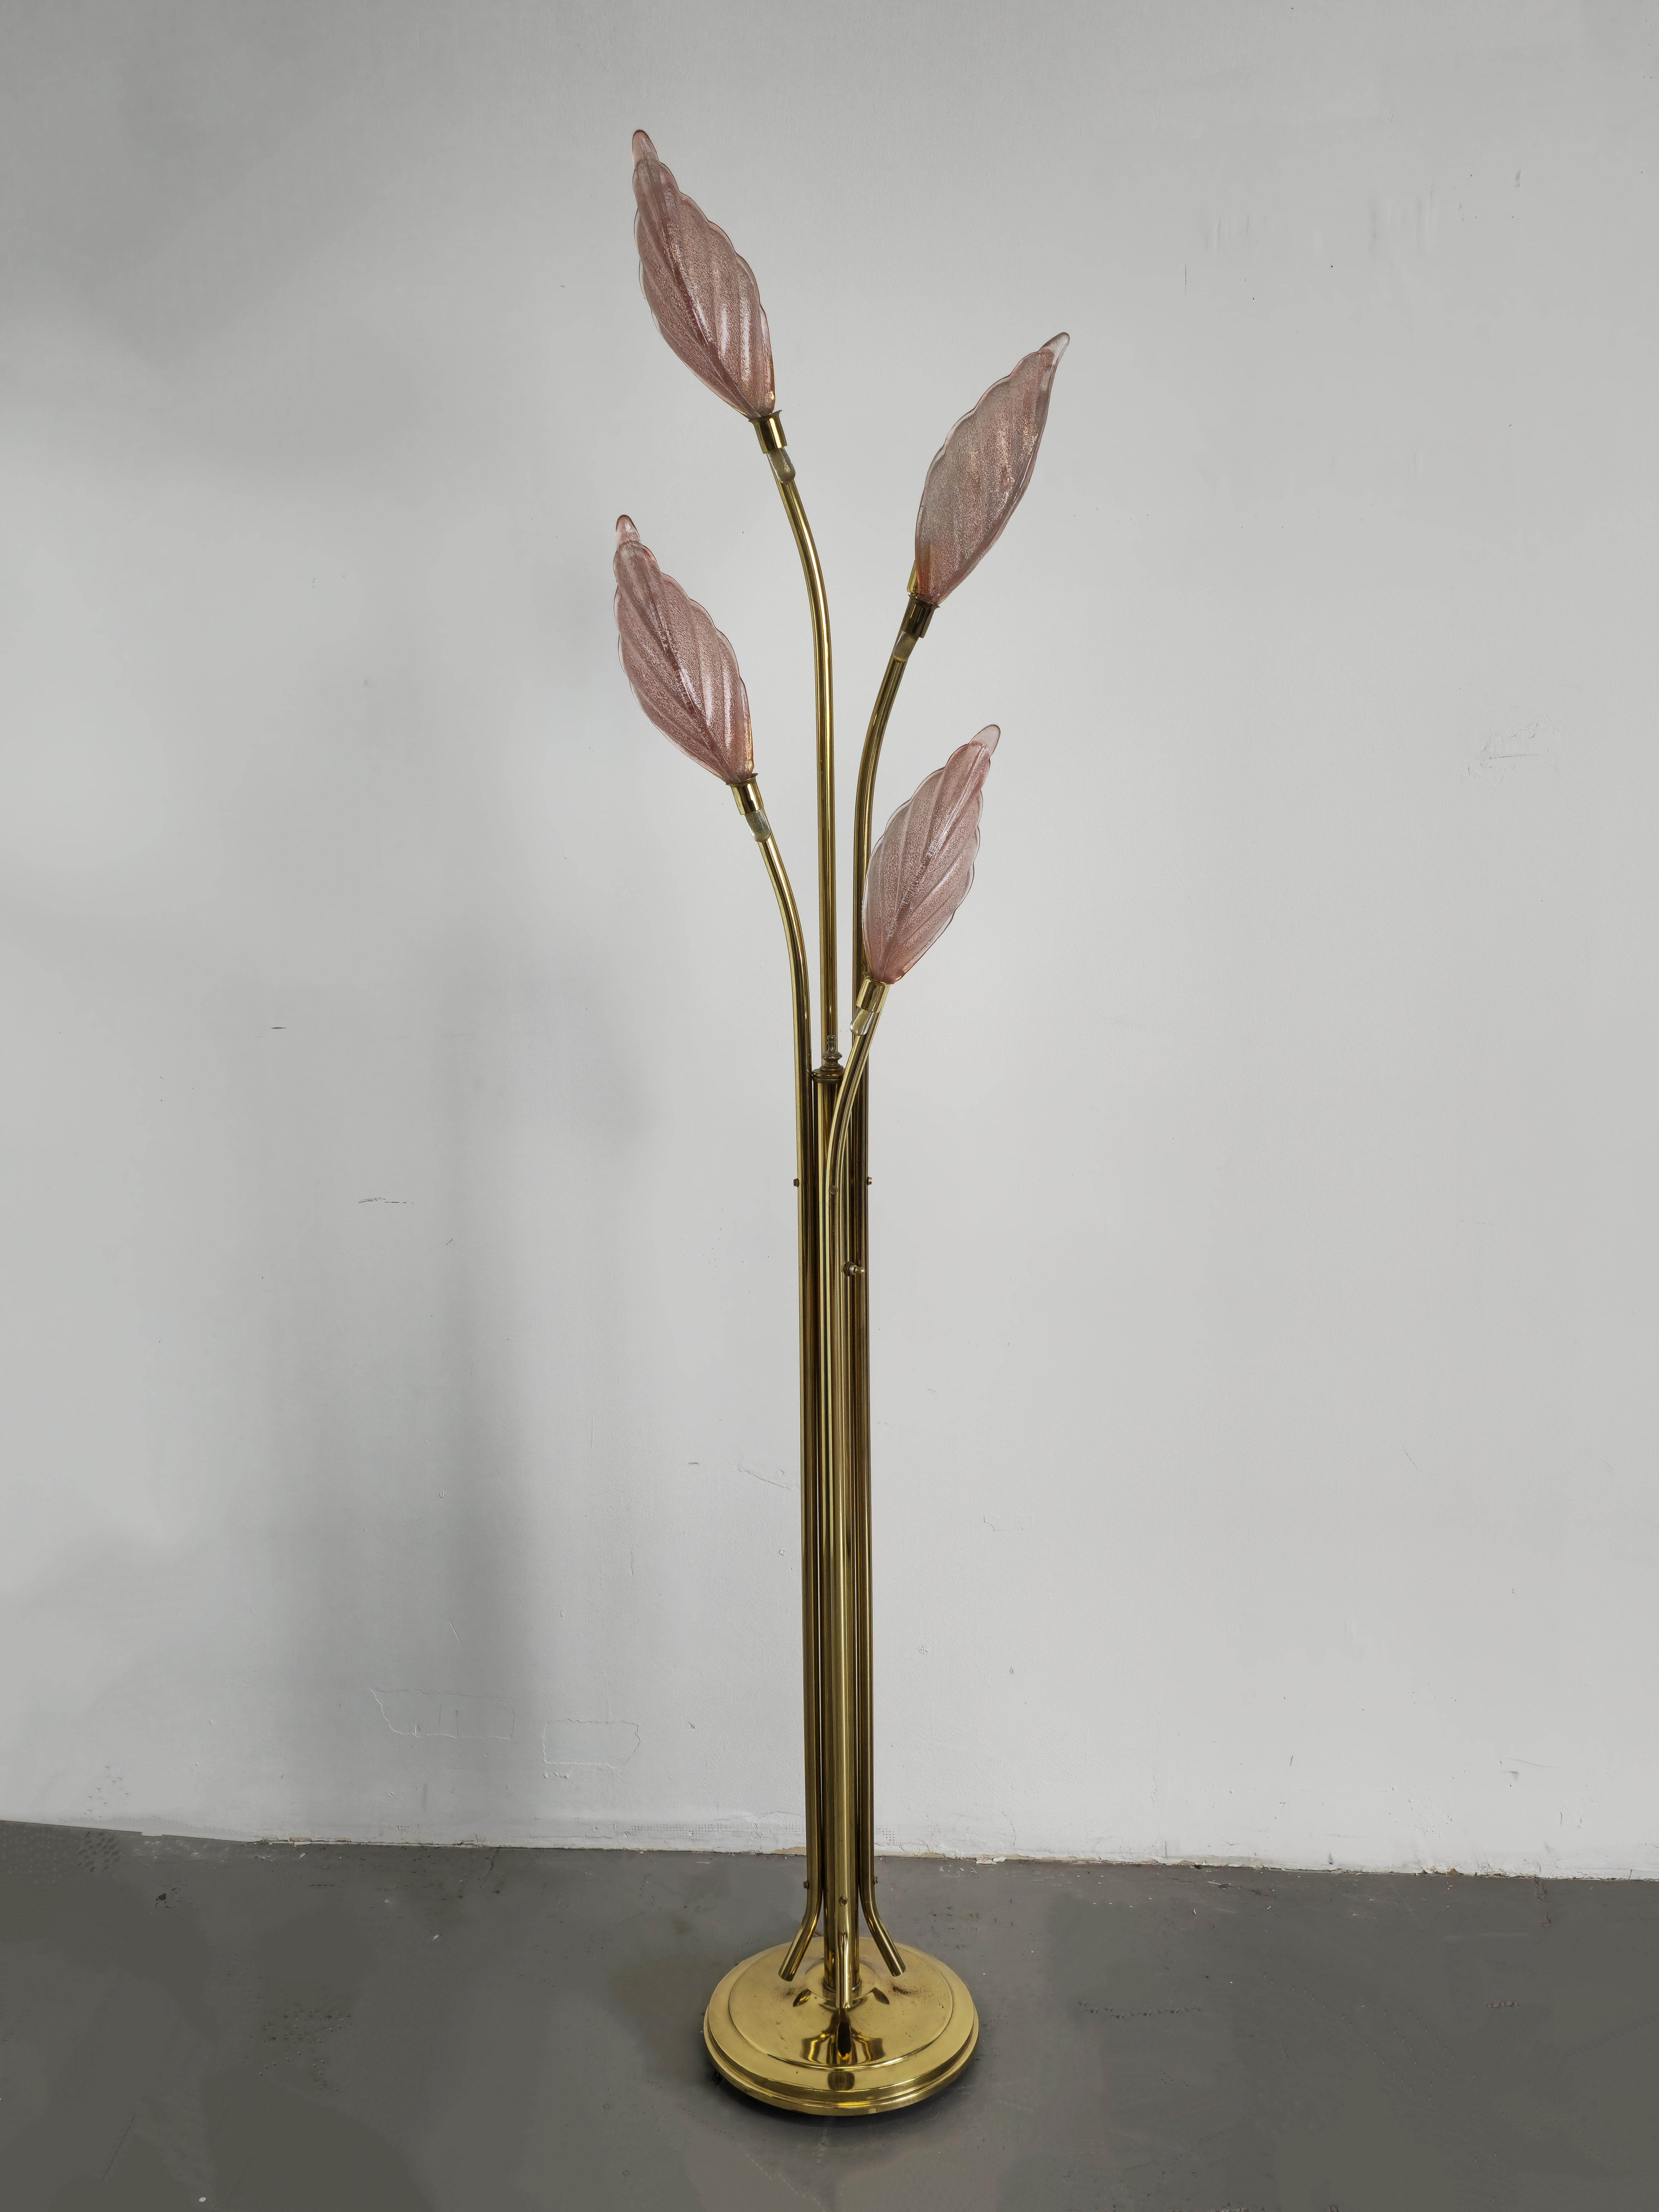 Stunning four tier art glass and brass floral  floor lamp from the 1970s. It is reminiscent of hollywood regency design. Crafted with precision, this brass floor lamp features art glass floral shaped shades. Each shade is crafted with art glass in a